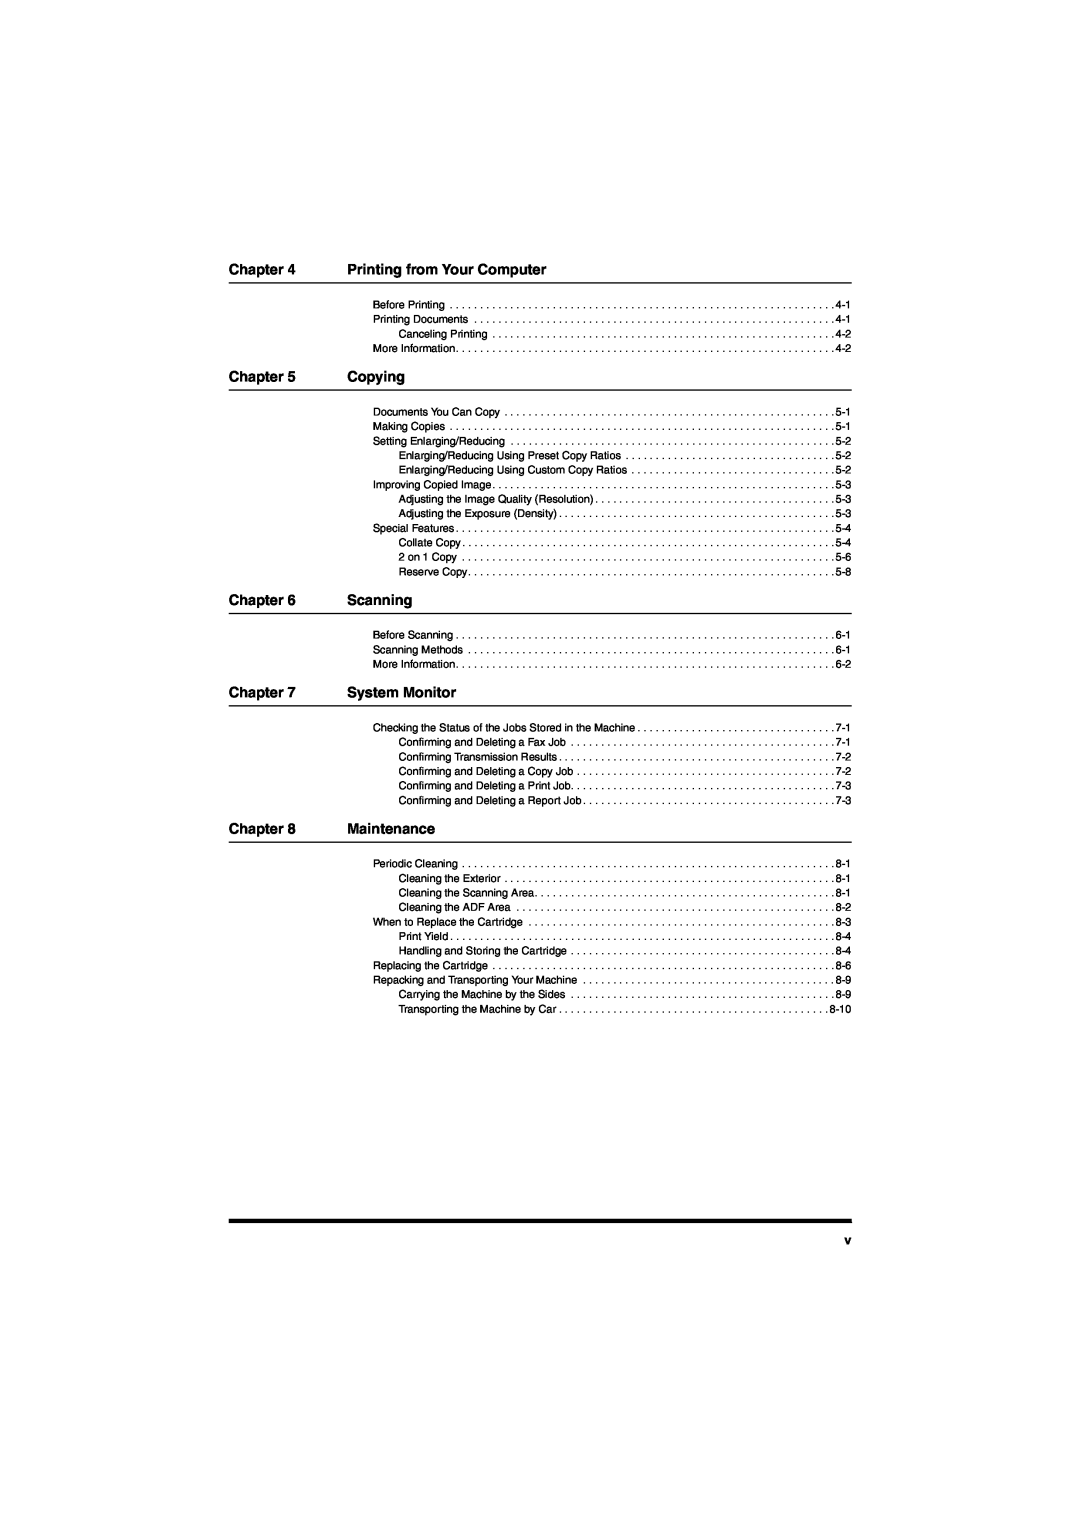 Canon MF5650 manual Chapter 